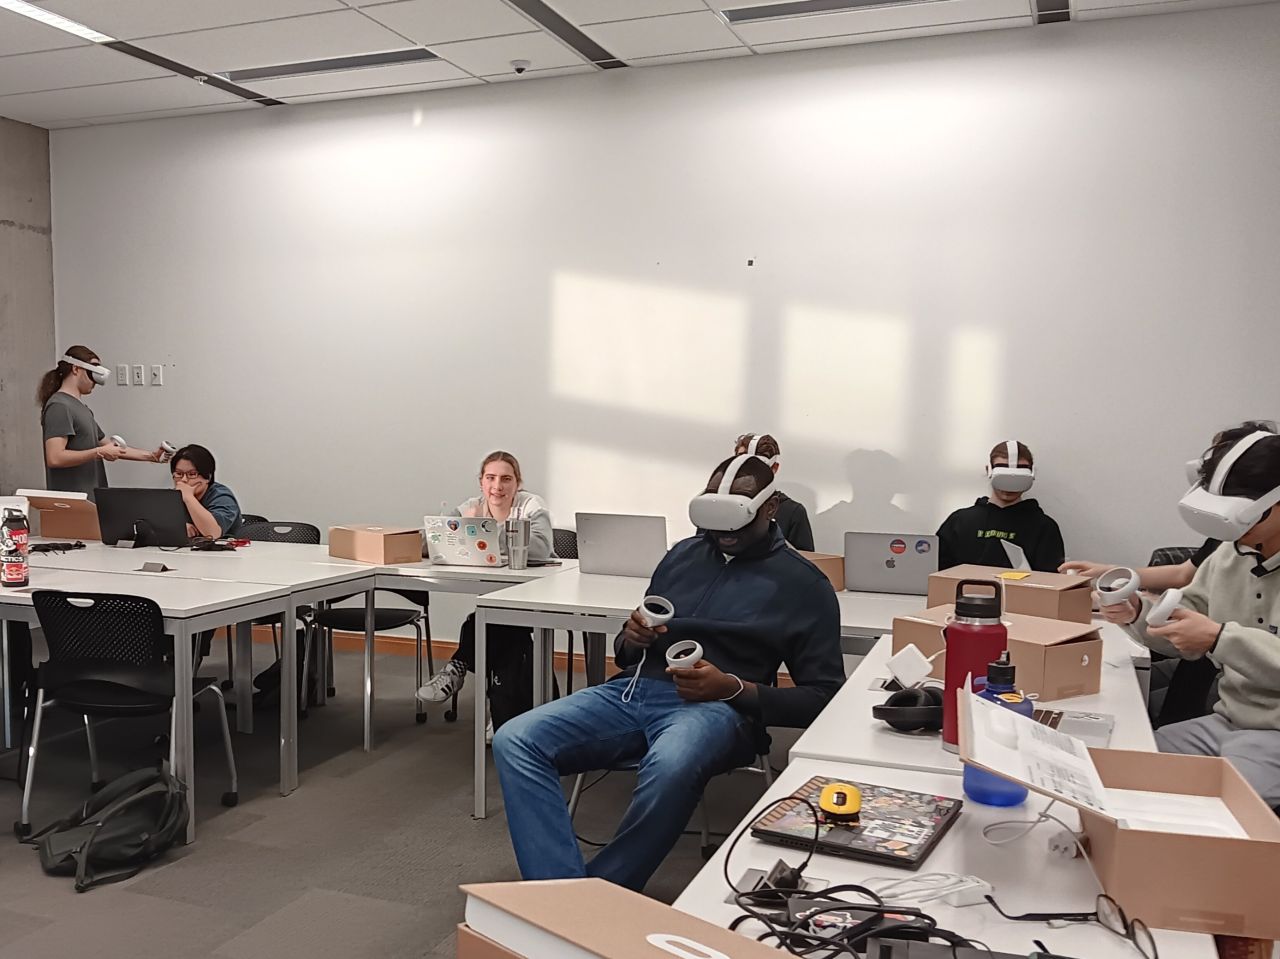 Students used VR in classroom